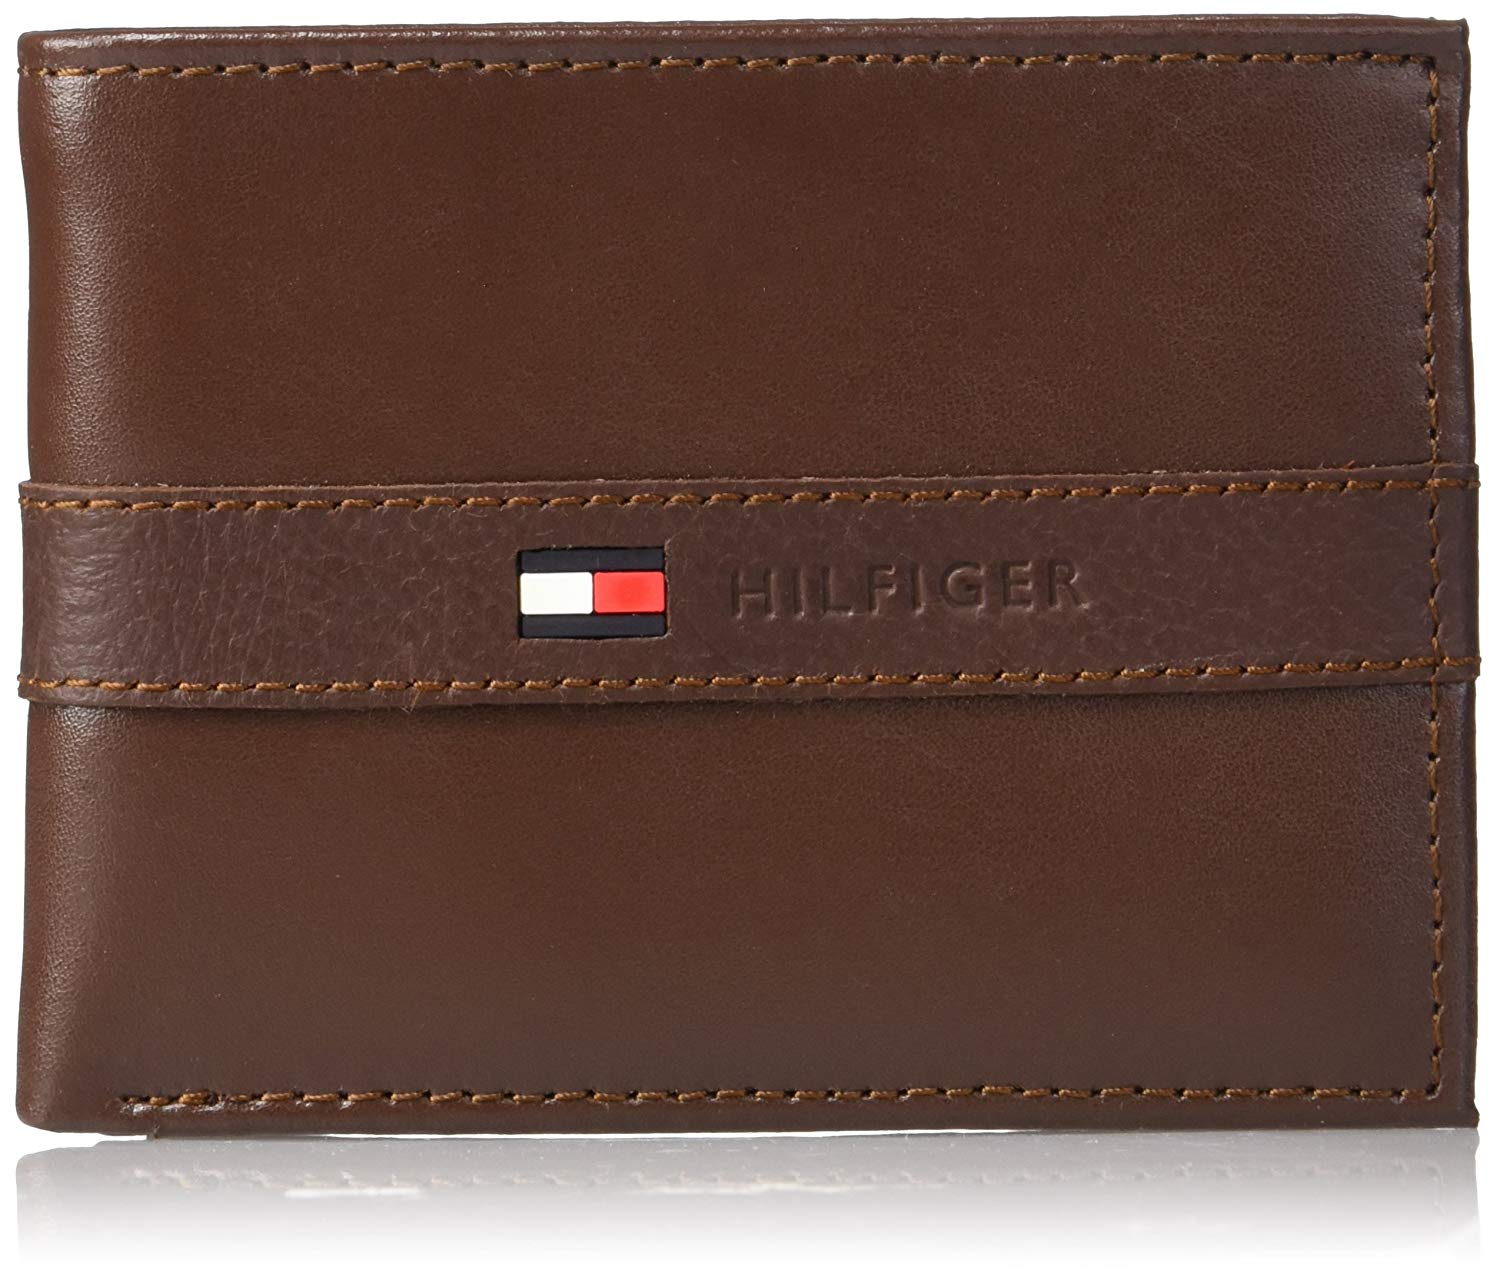 Thin Sleek Casual Bifold Wallet with 